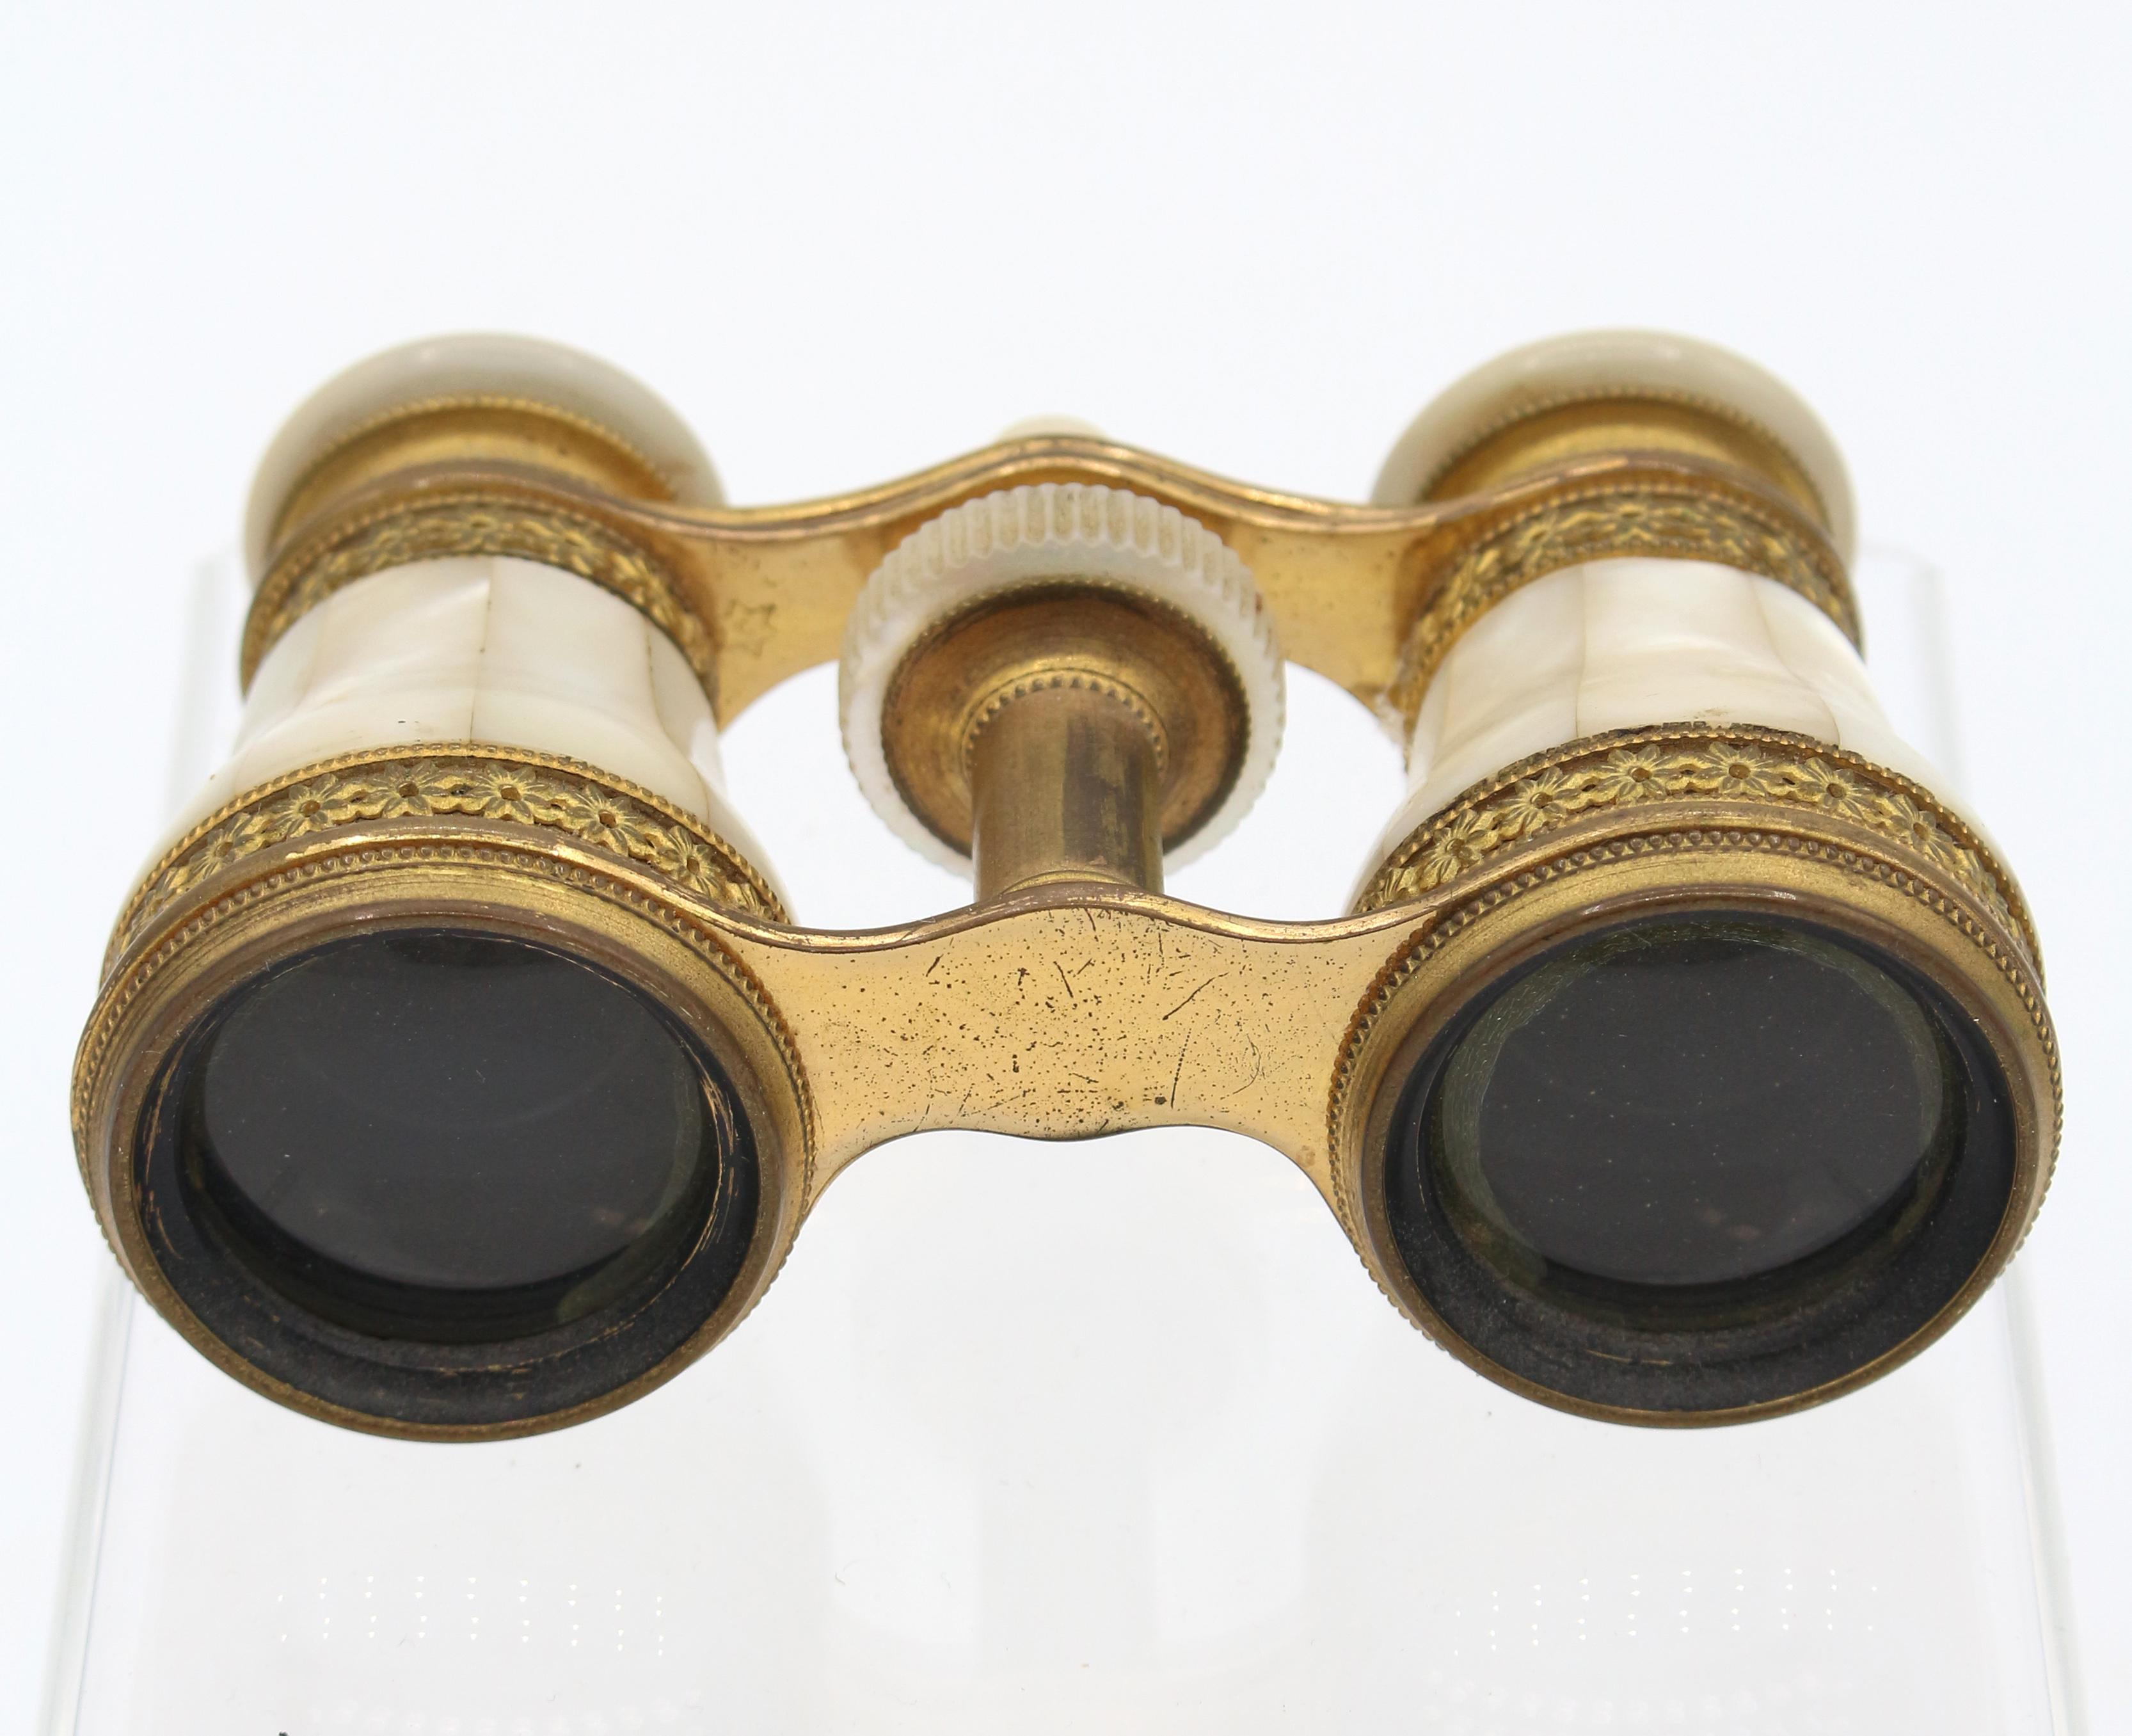 Circa 1900 opera glasses by Colmont F.T, Paris, France. Mother of pearl with gilt brass star & bead bandings. The mounts are unusually fine & rarely found.
3 7/8